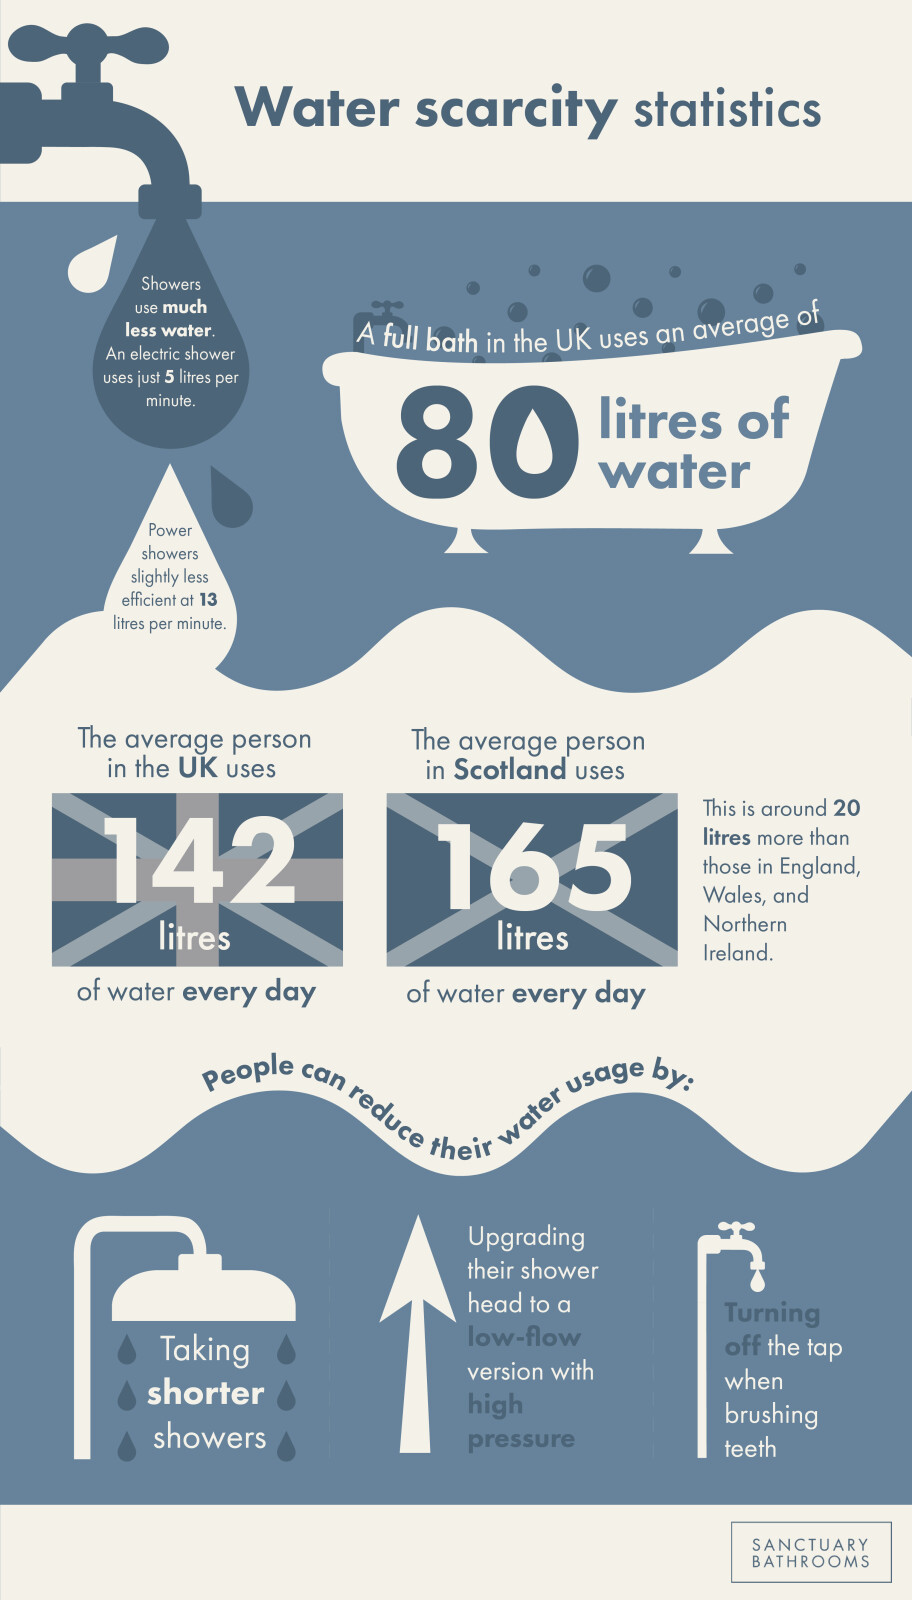 Graphic image providing information and guidance about how to reduce water consumption